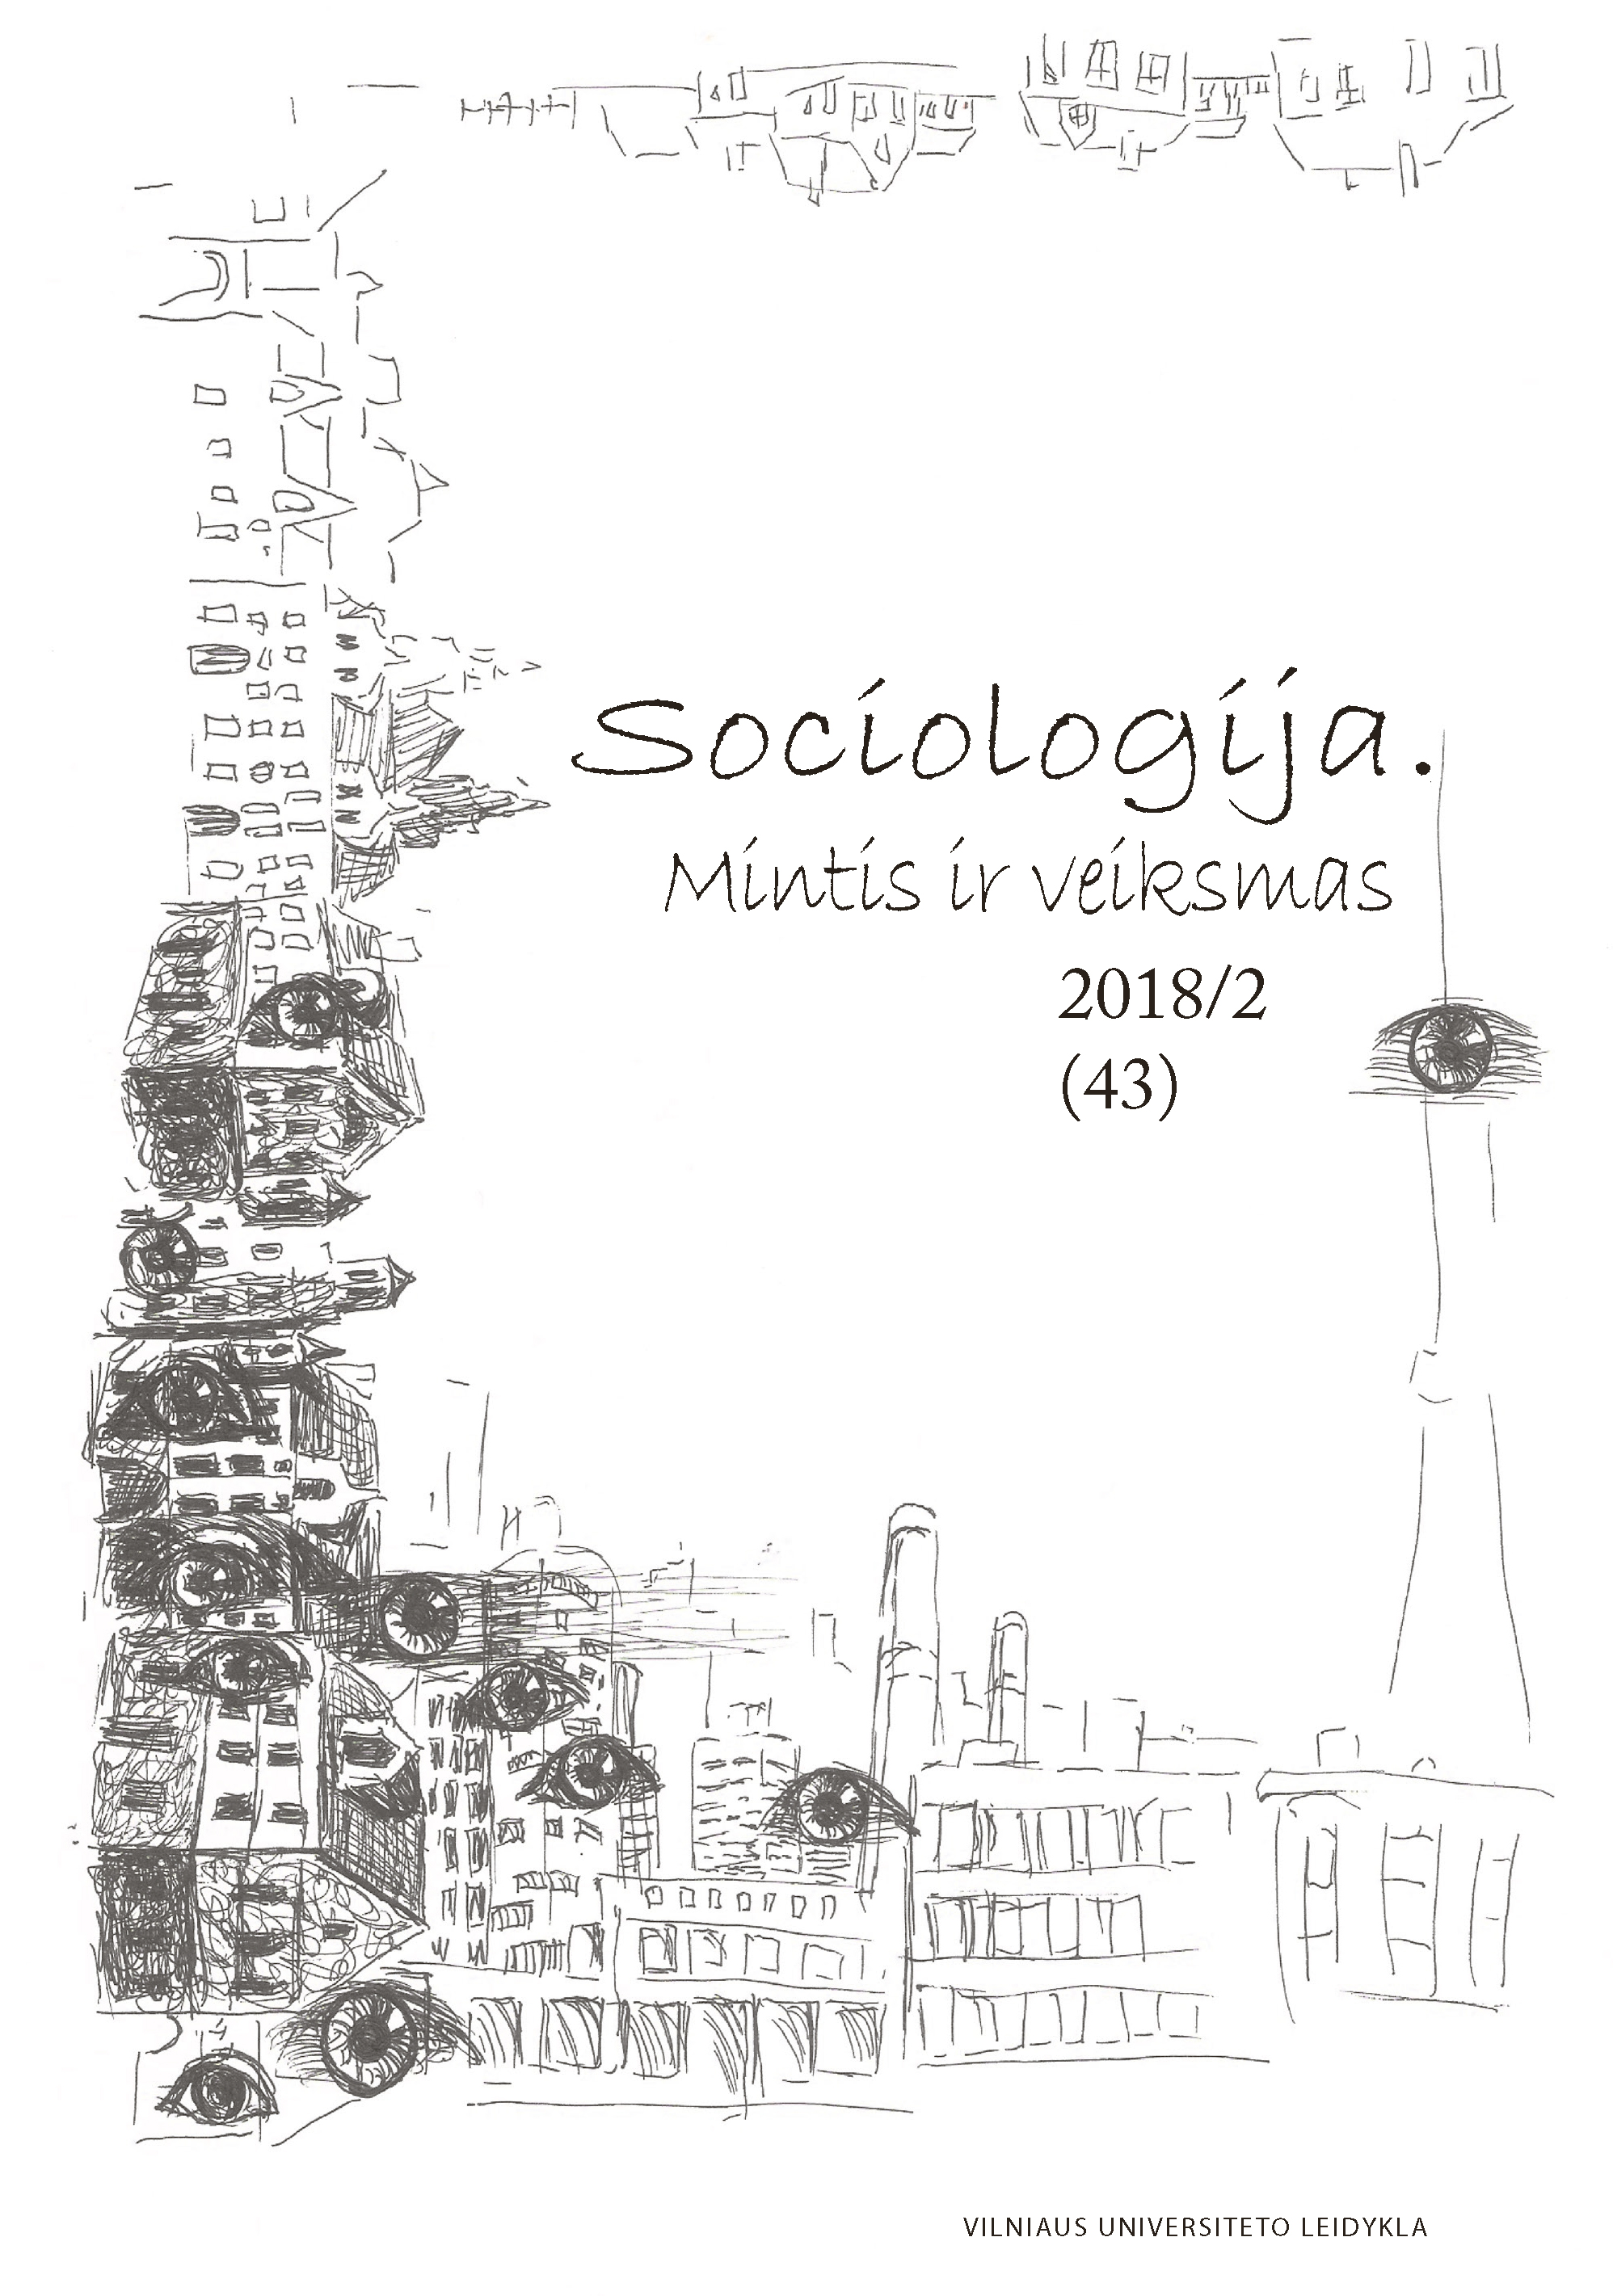 European Social Survey: 10 Years in Lithuania Cover Image